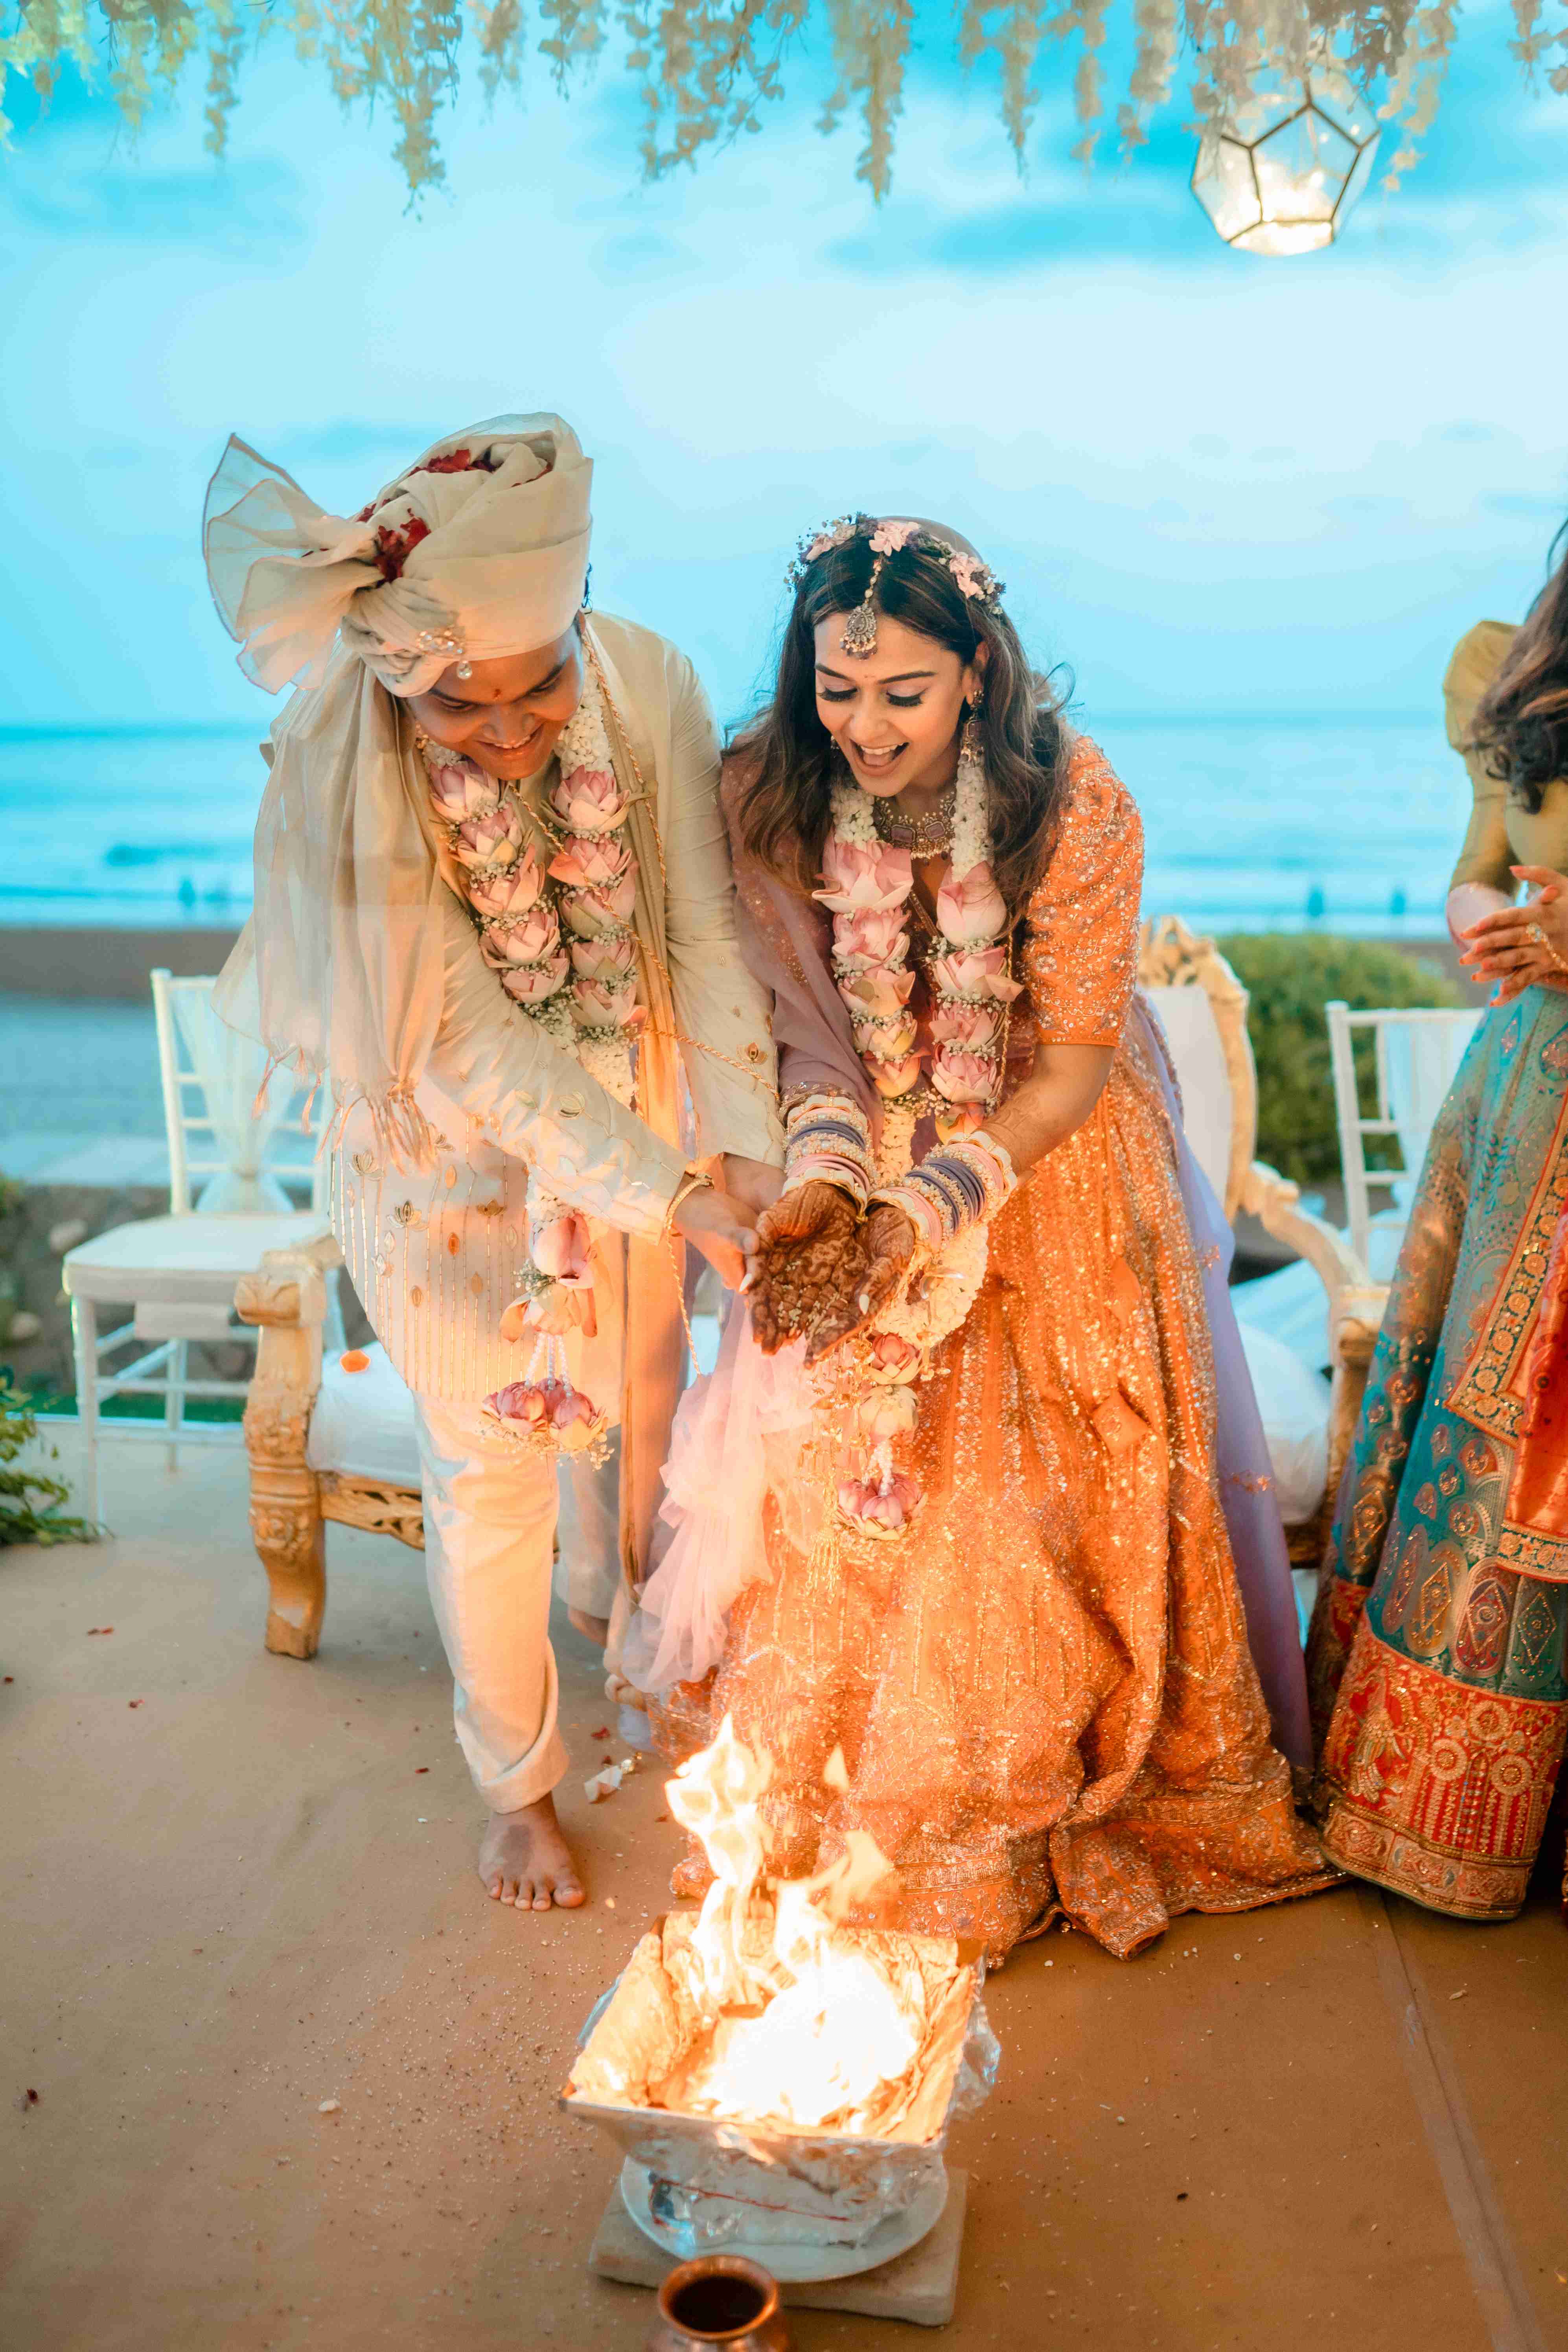 Can’t Stop Swooning Over Palak & Kabir’s Stunning Wedding Pictures